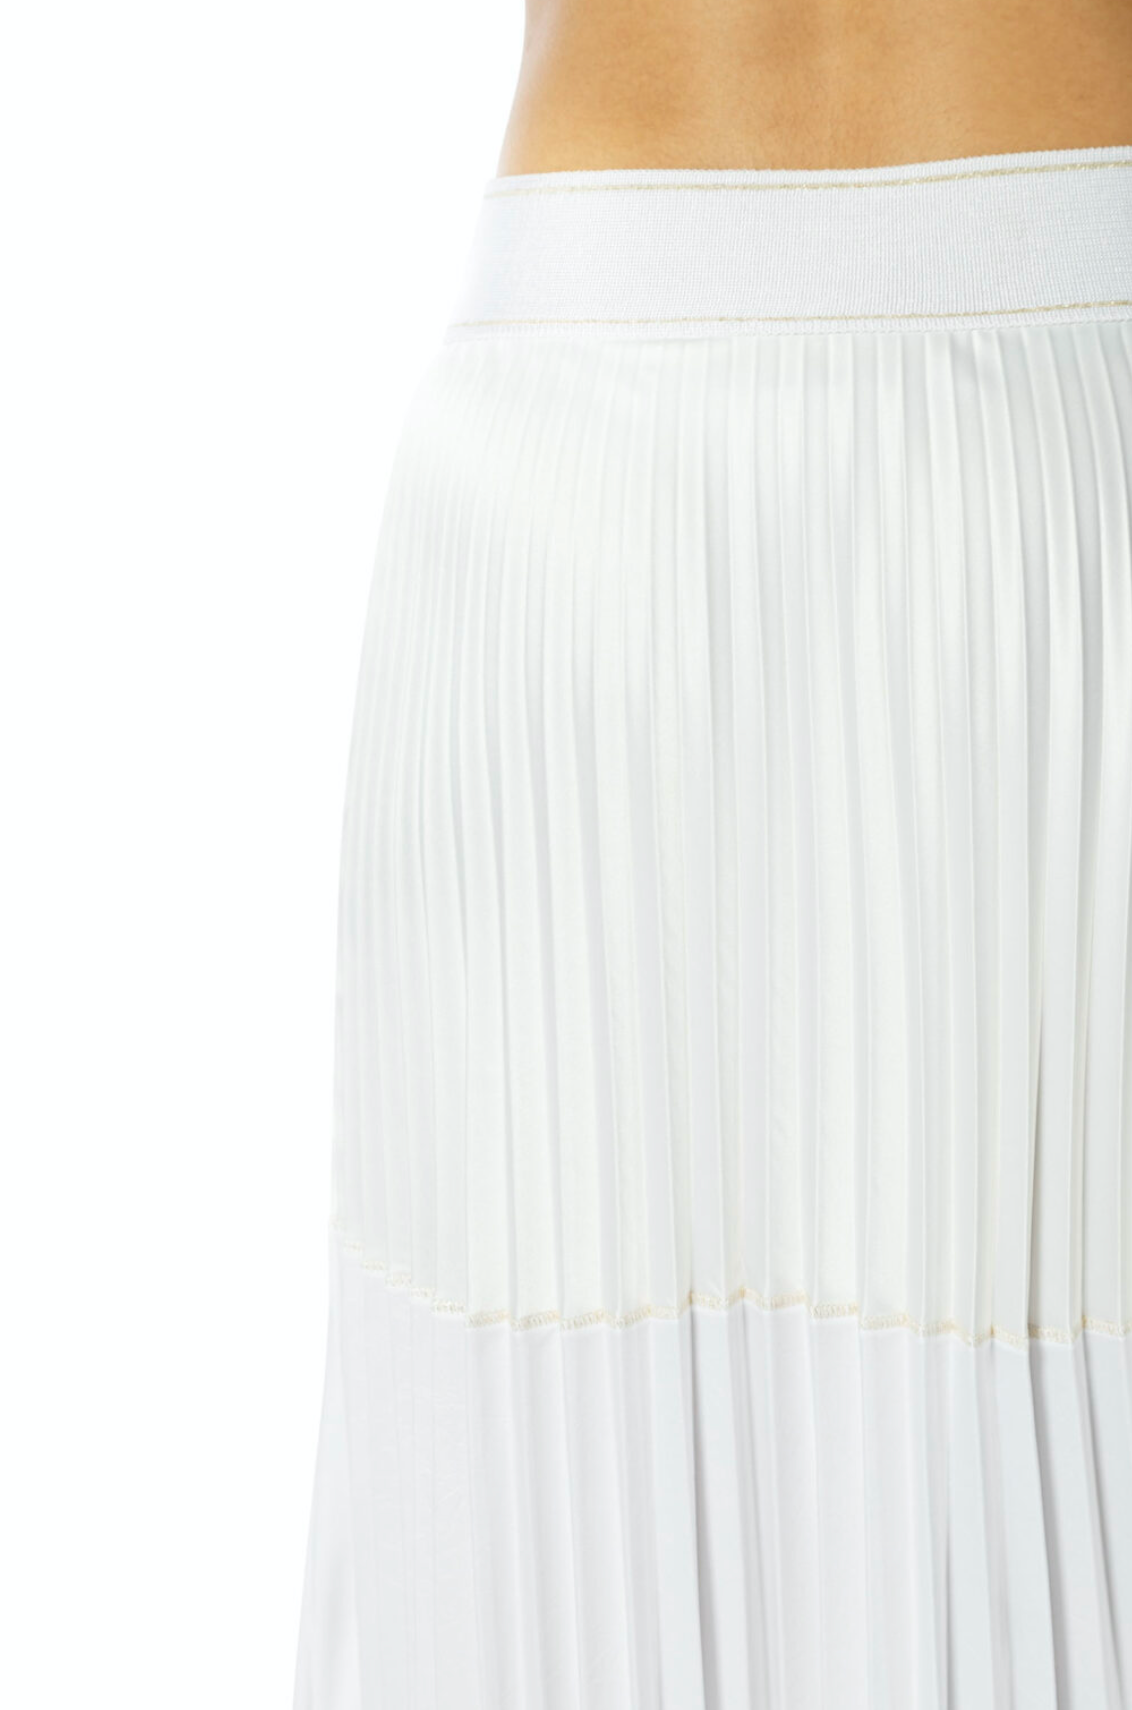 Cream Pleated Maxi Skirt With Elasticated Waist Band & Gold & Silver Stitch Detailing